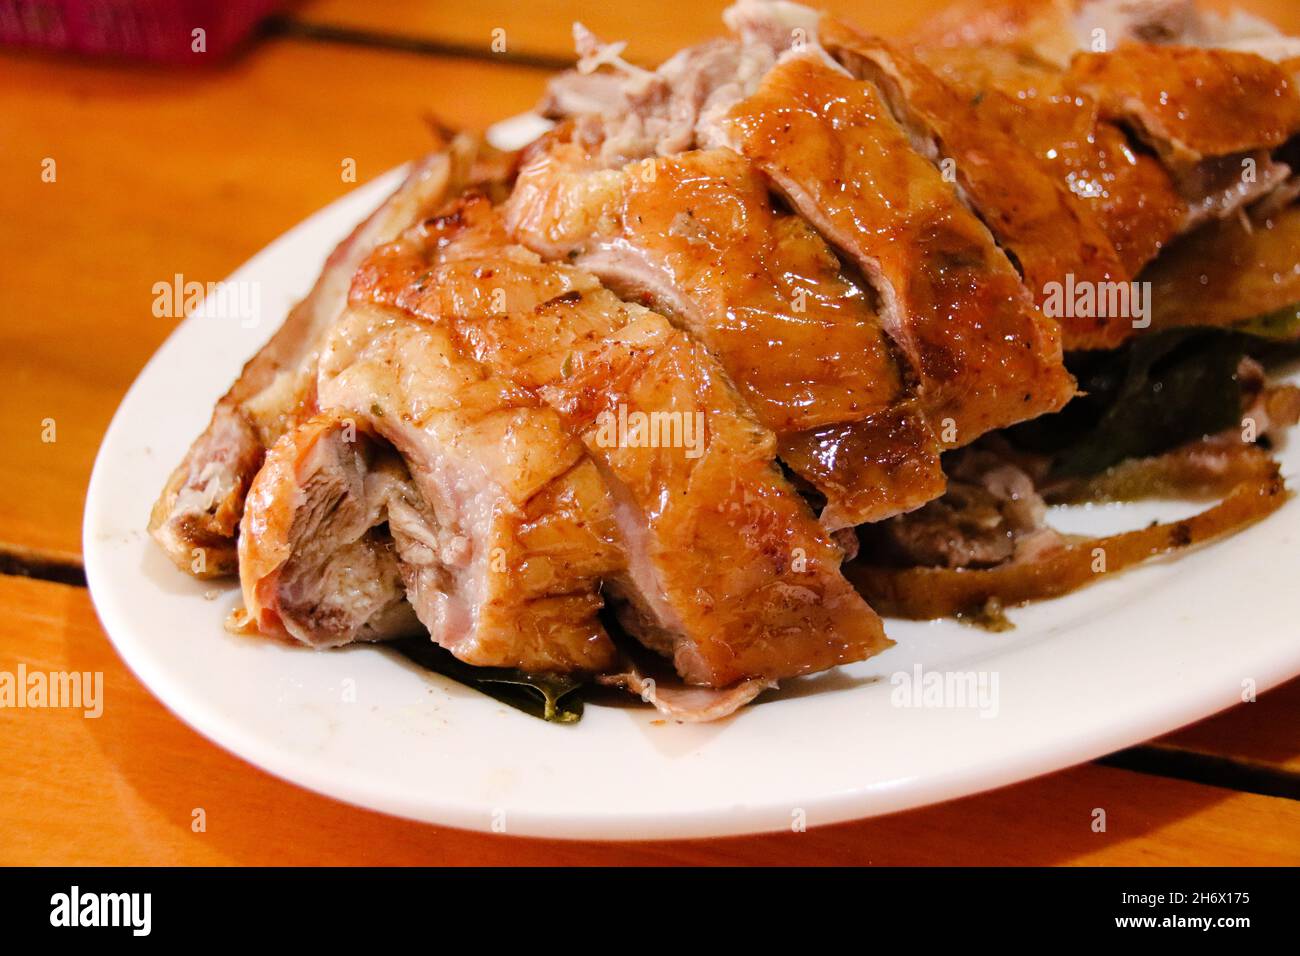 Close up of Vit quay or vietnamese roasted duck Stock Photo